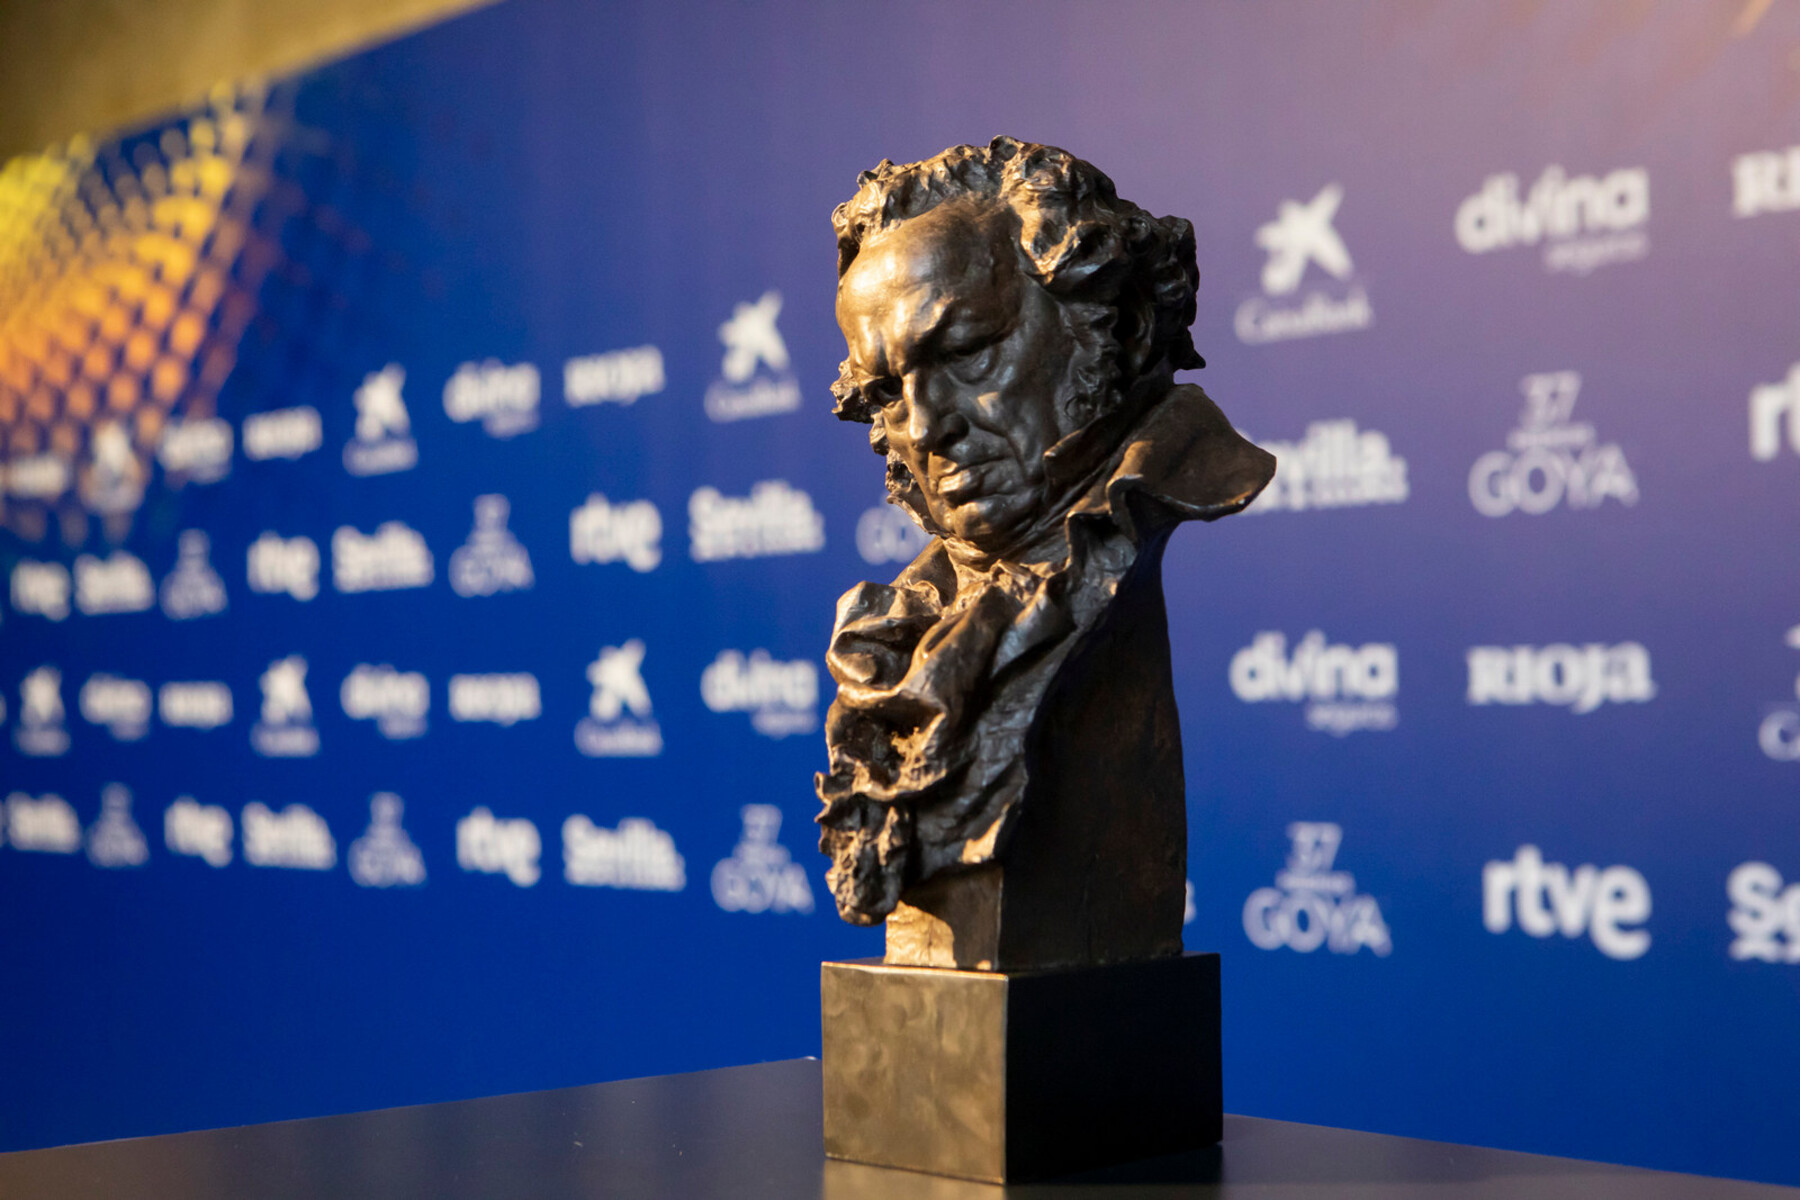 17 Facts About Goya Awards - Facts.net